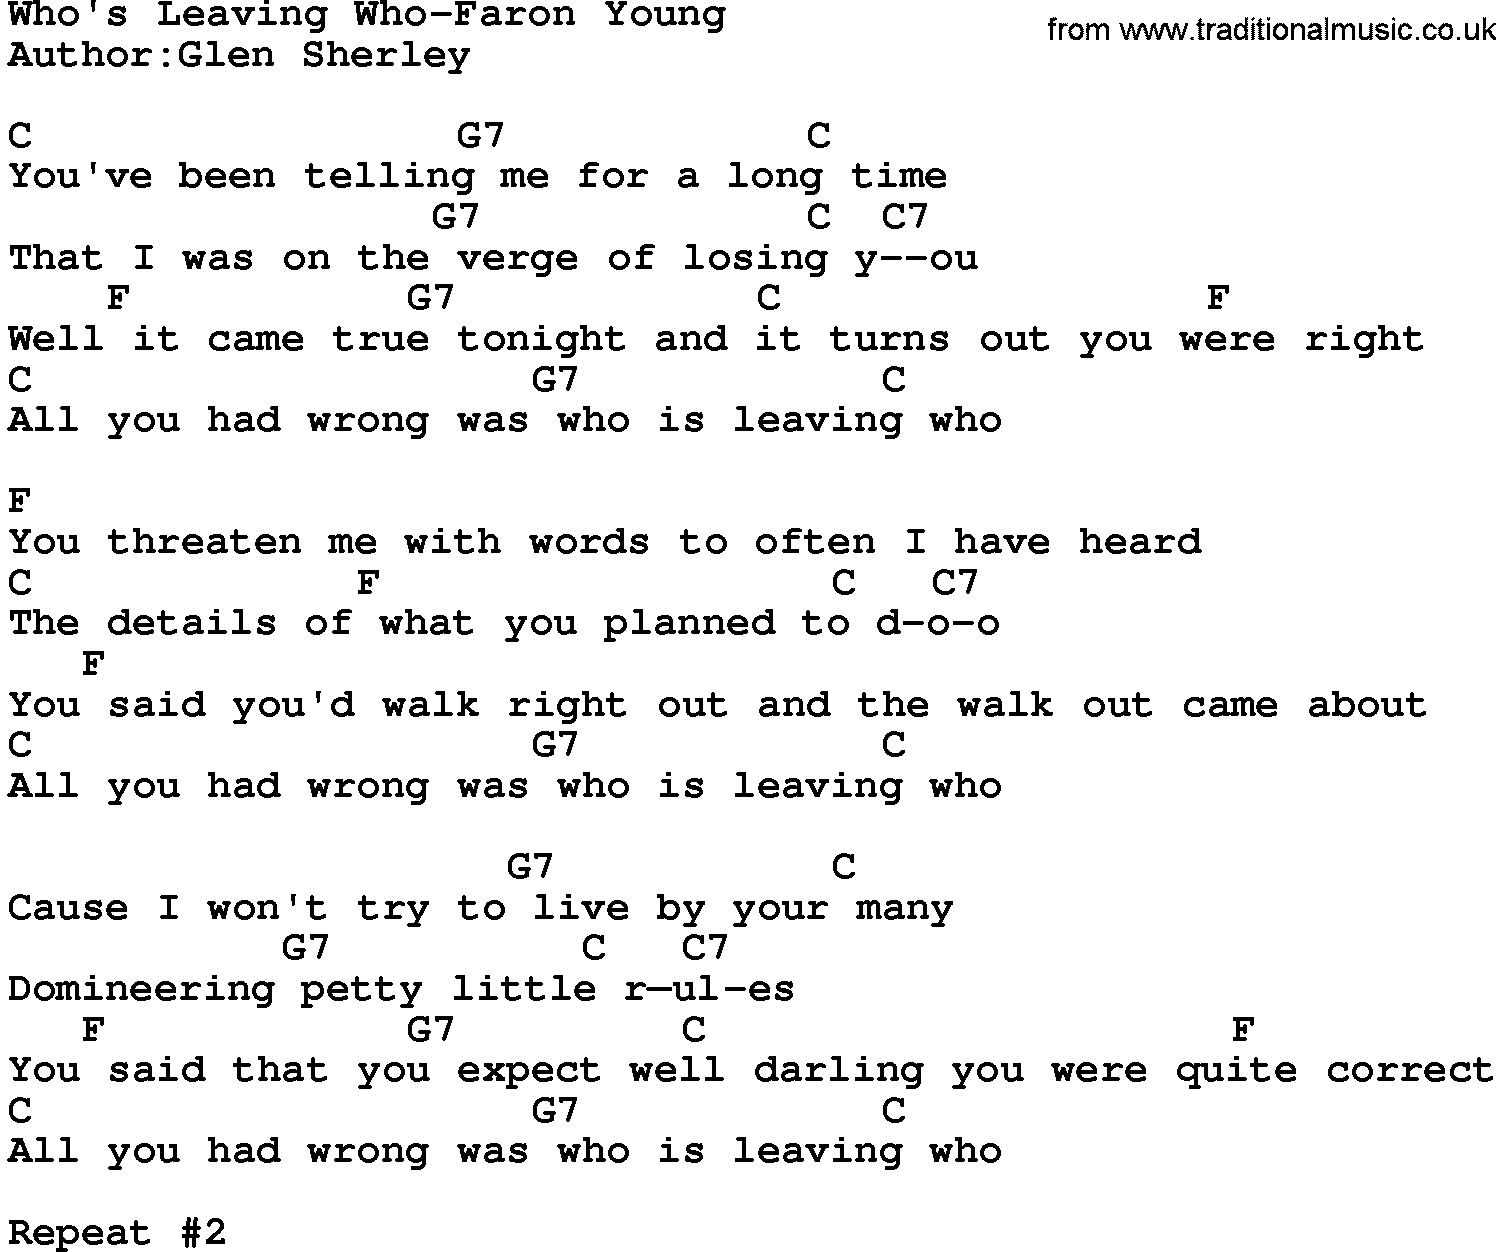 Country music song: Who's Leaving Who-Faron Young lyrics and chords